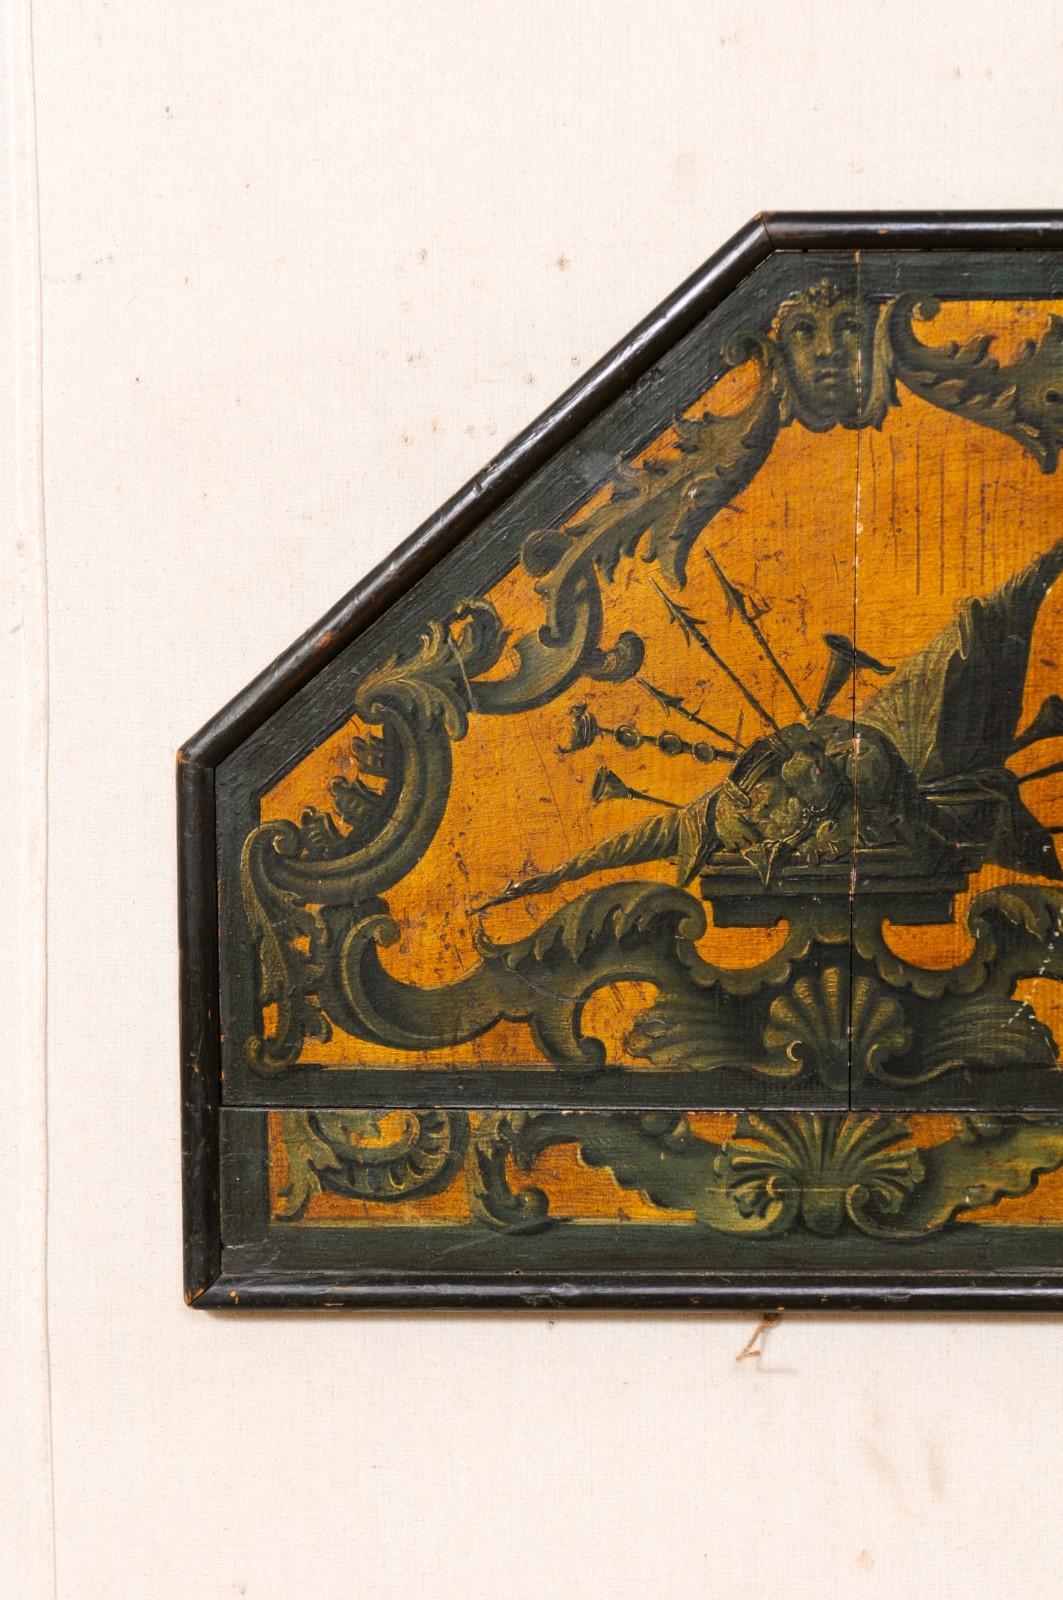 An 18th Century Italian Hand-Painted Plaque, Decorative Wall Ornament In Good Condition For Sale In Atlanta, GA